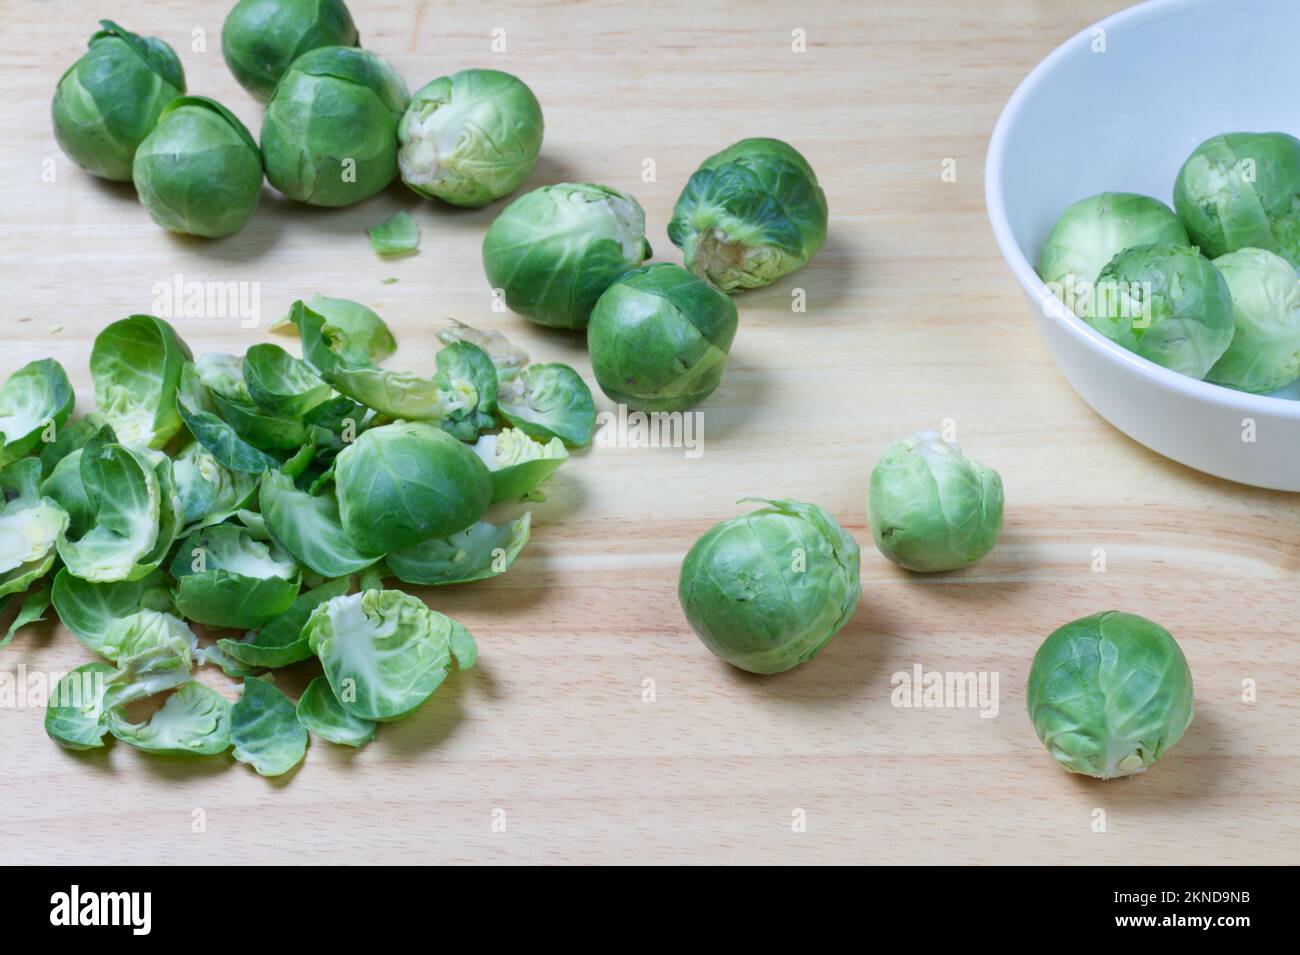 Sprouts, a winter vegetable, on a wood effect background. Stock Photo